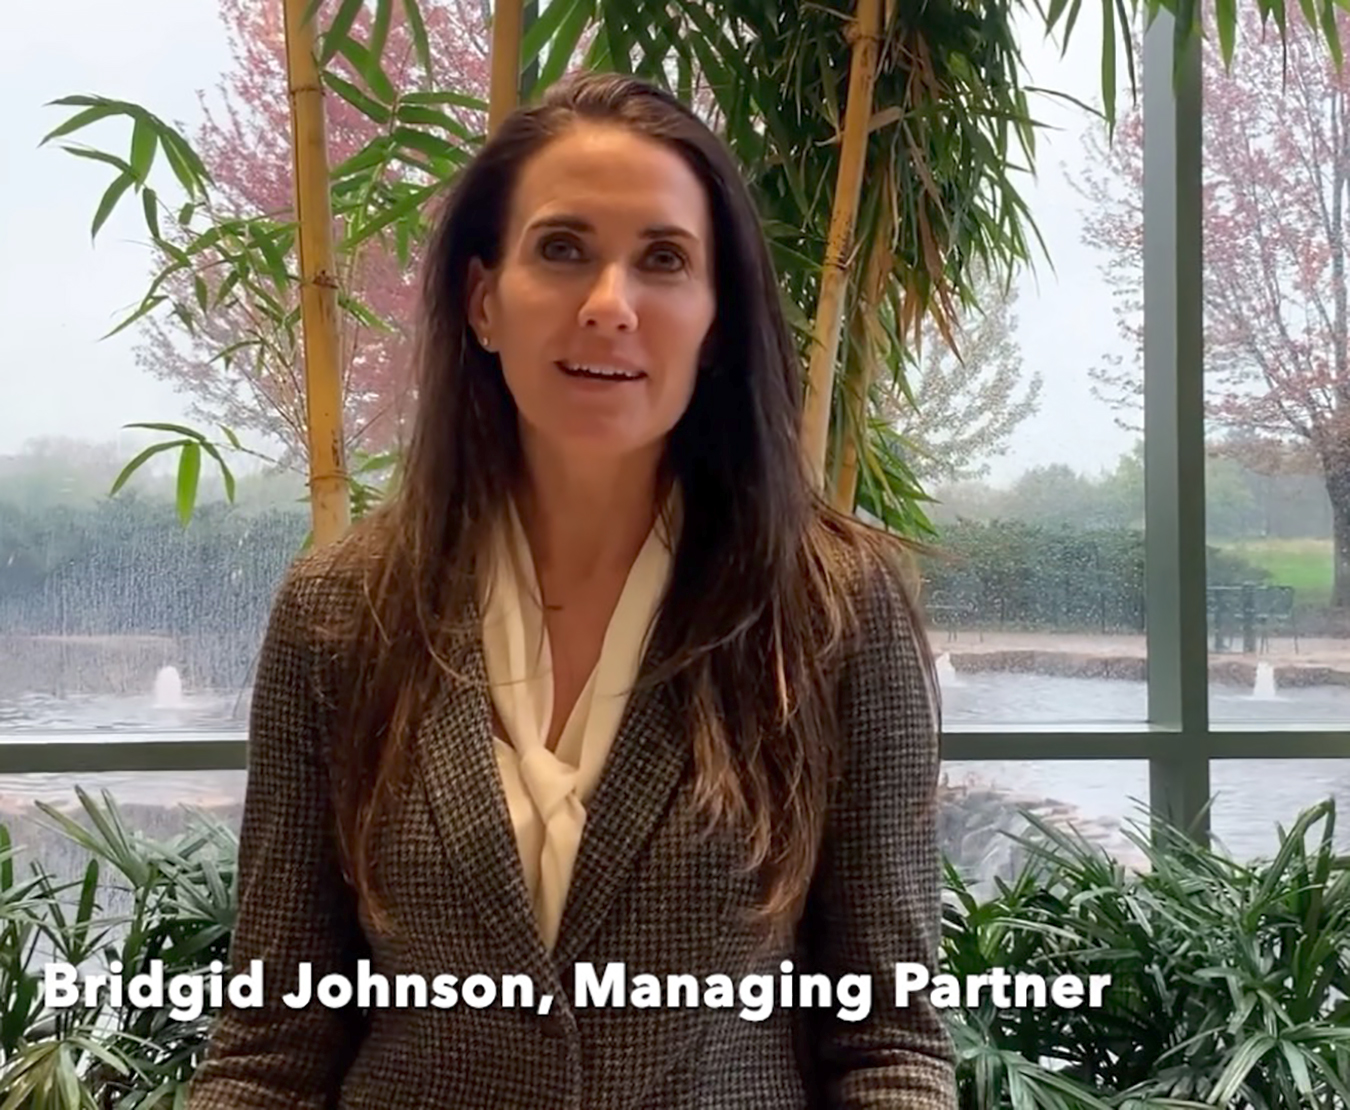 Bridgid Johnson, Managing Partner of StratMg with windows and green plants in the background